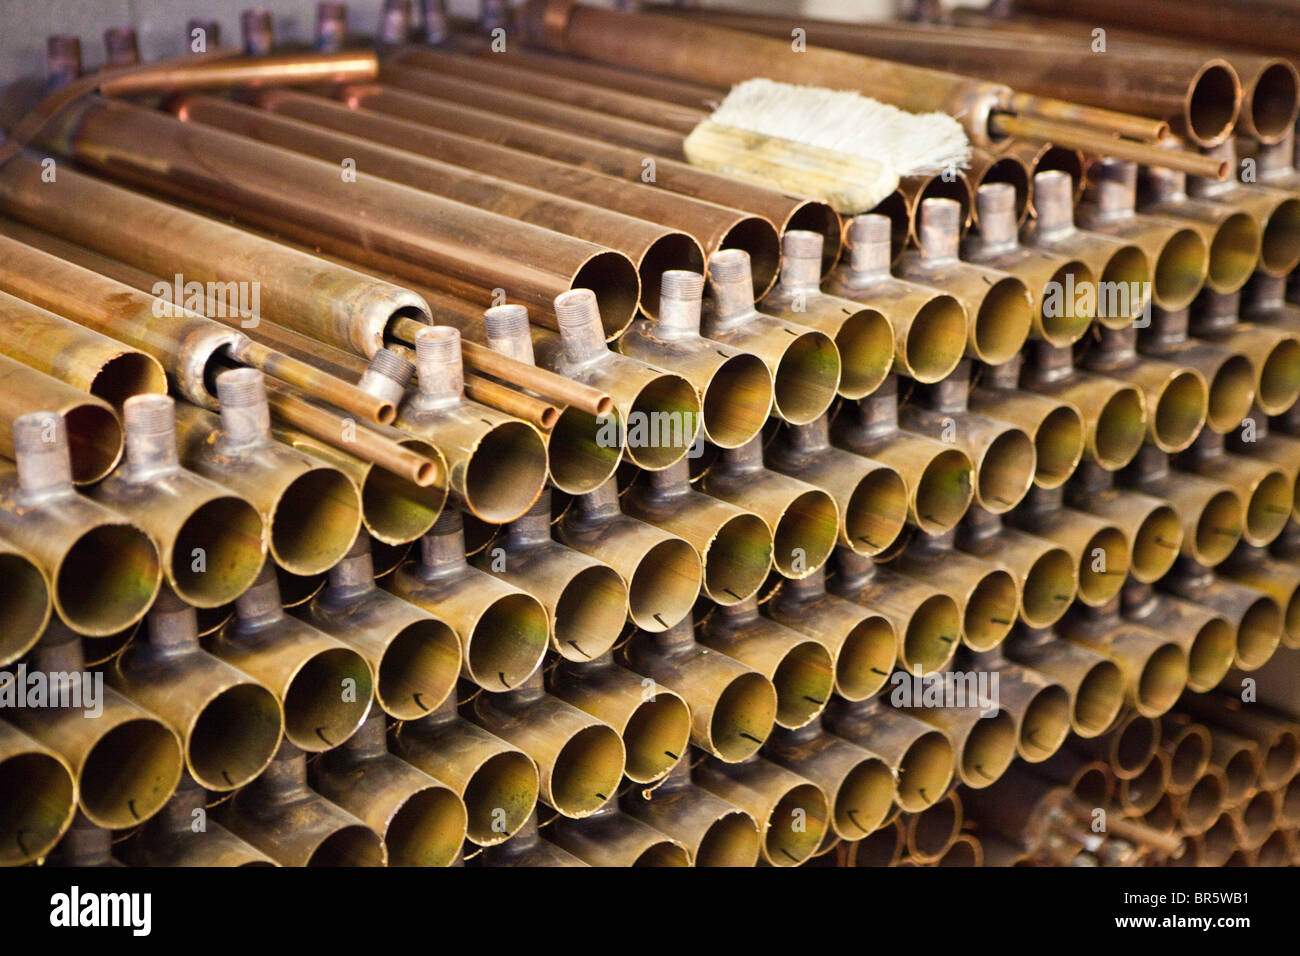 A stack of half completed Willis Renewables Solar Syphons at the Copper Industries factory in Northern Ireland. Stock Photo